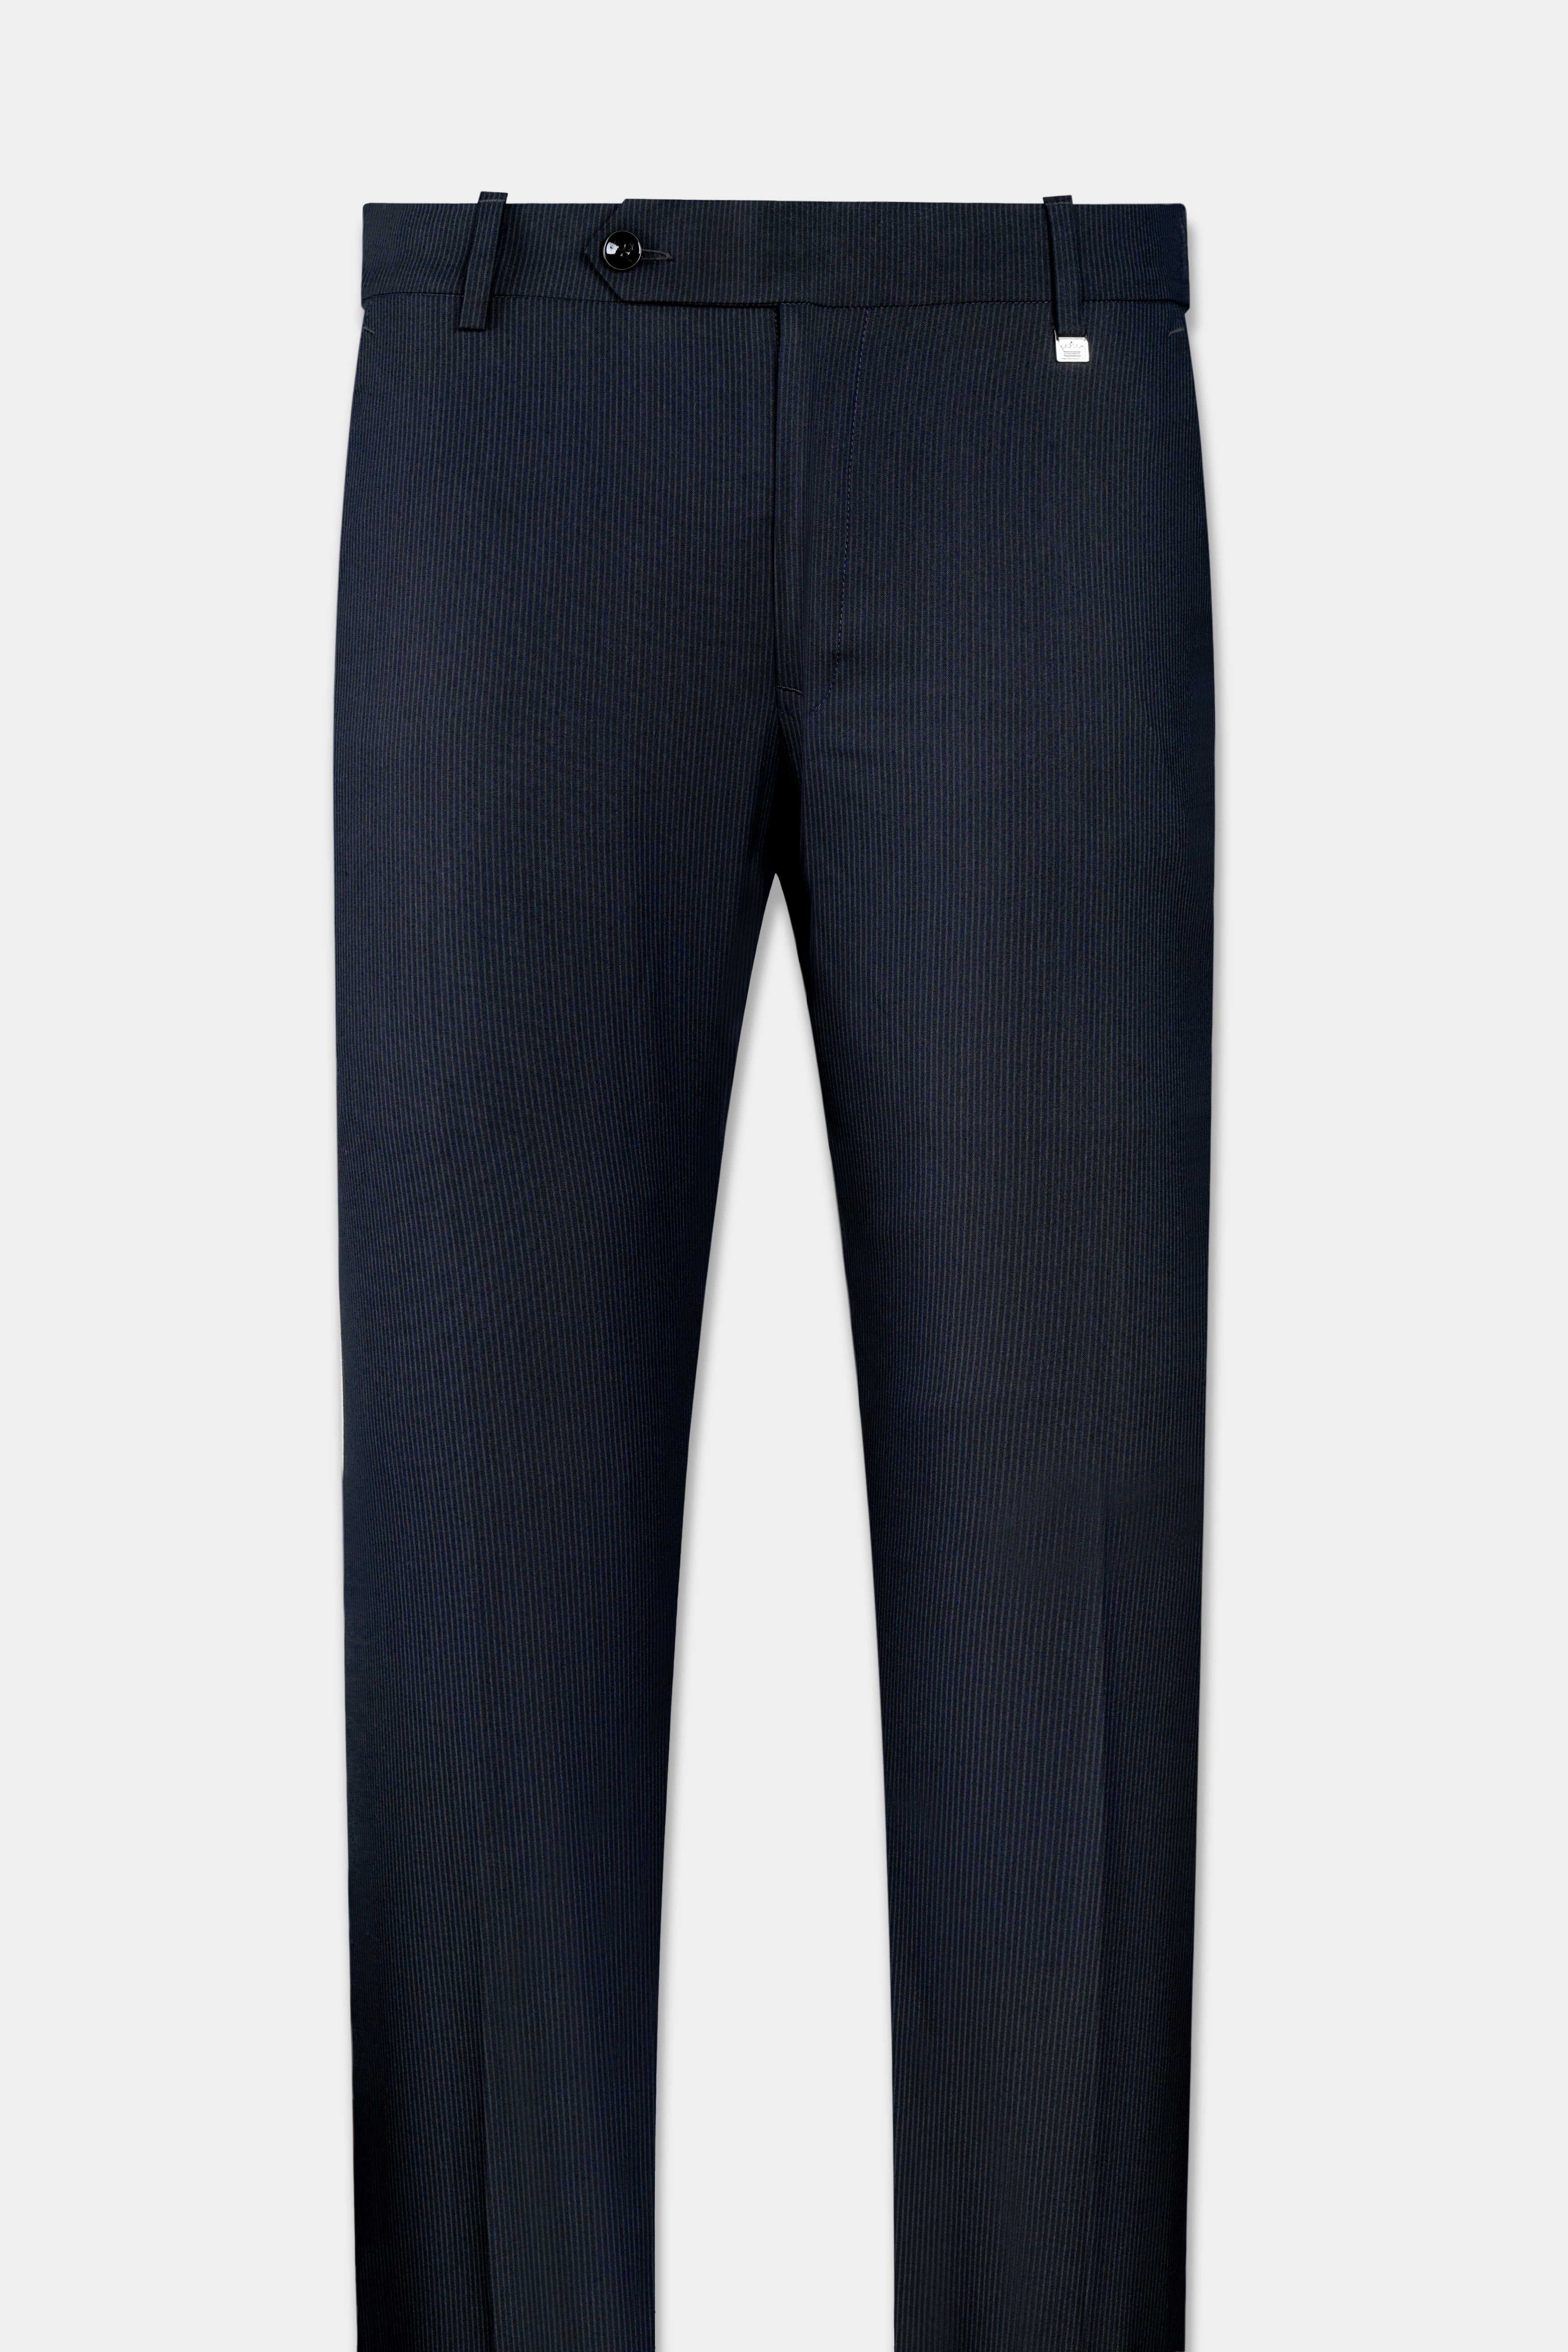 Charade Gray Wool Rich Stretchable Waistband Pant